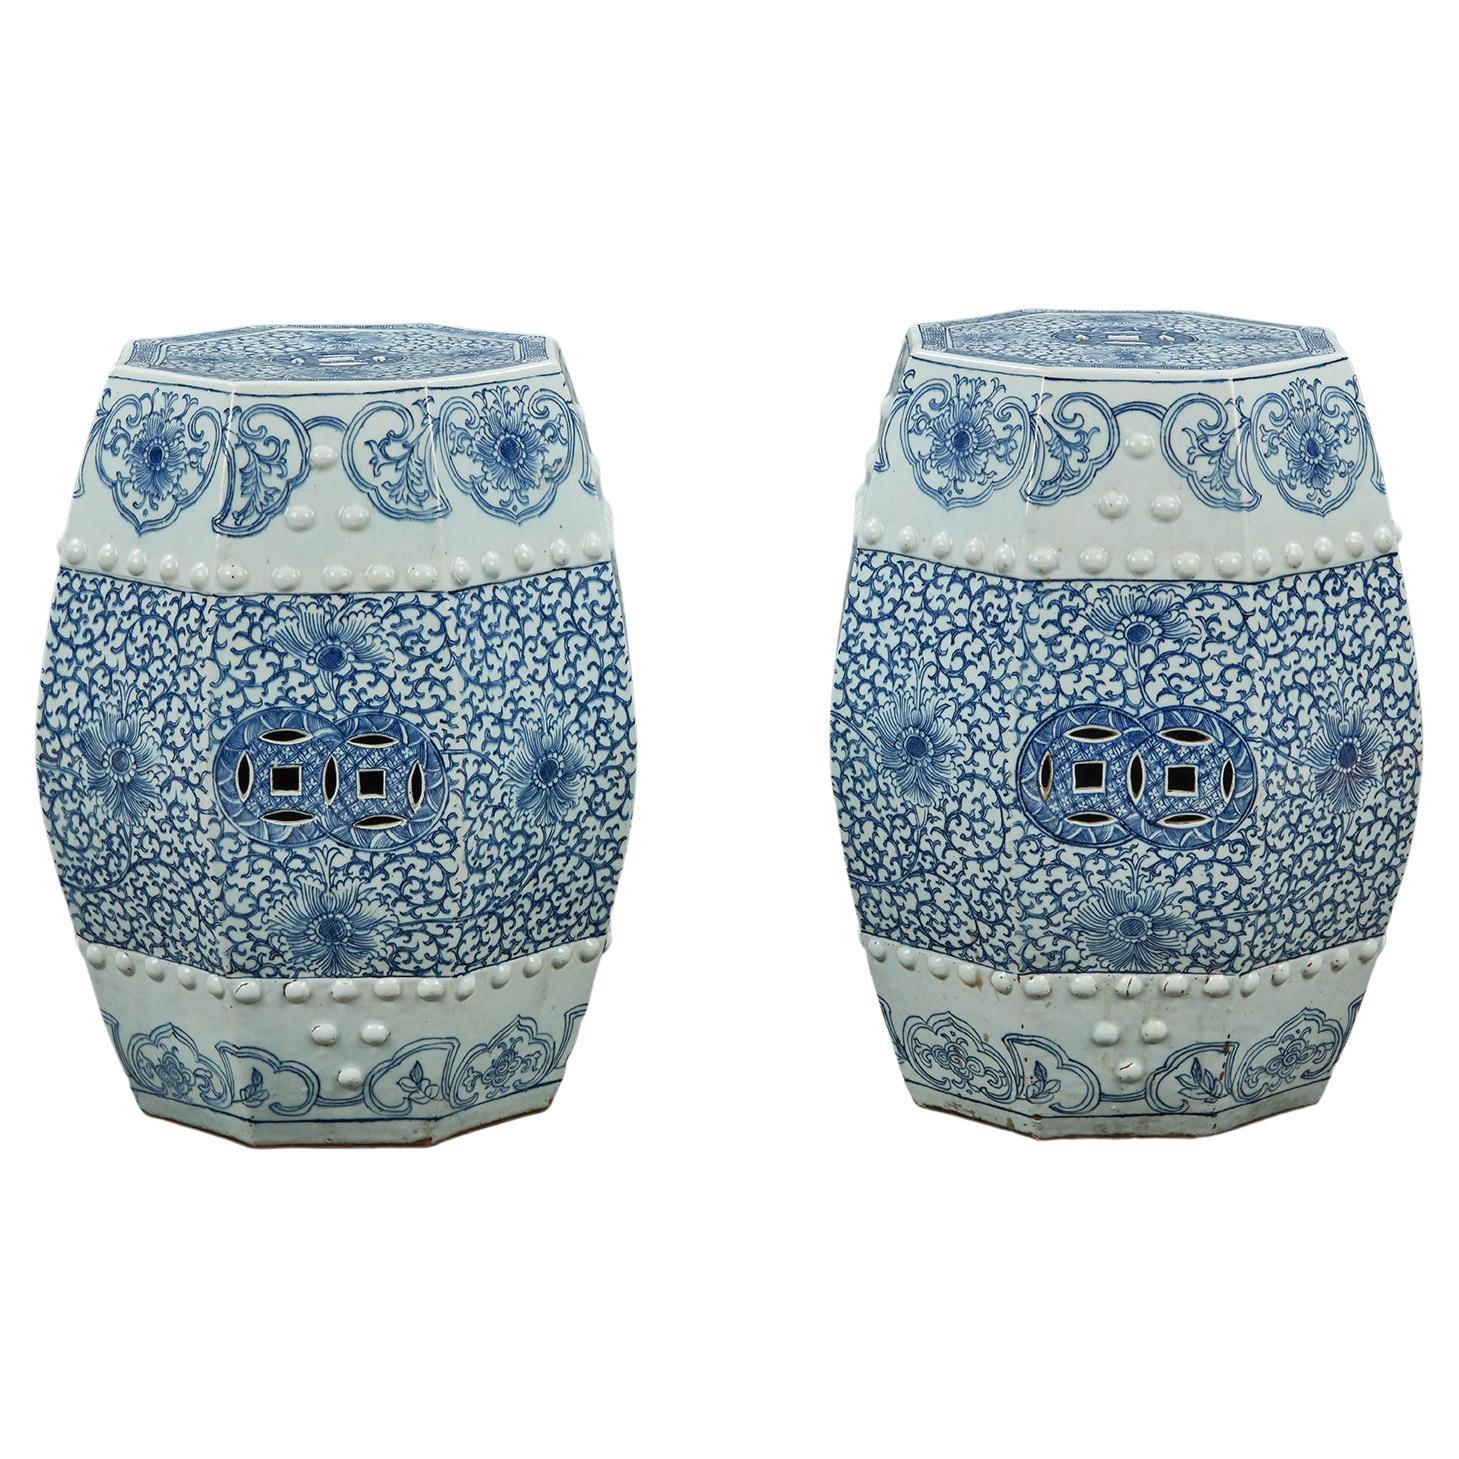 Pair of 19th Century Octagonal Chinese Blue and White Porcelain Garden Seats